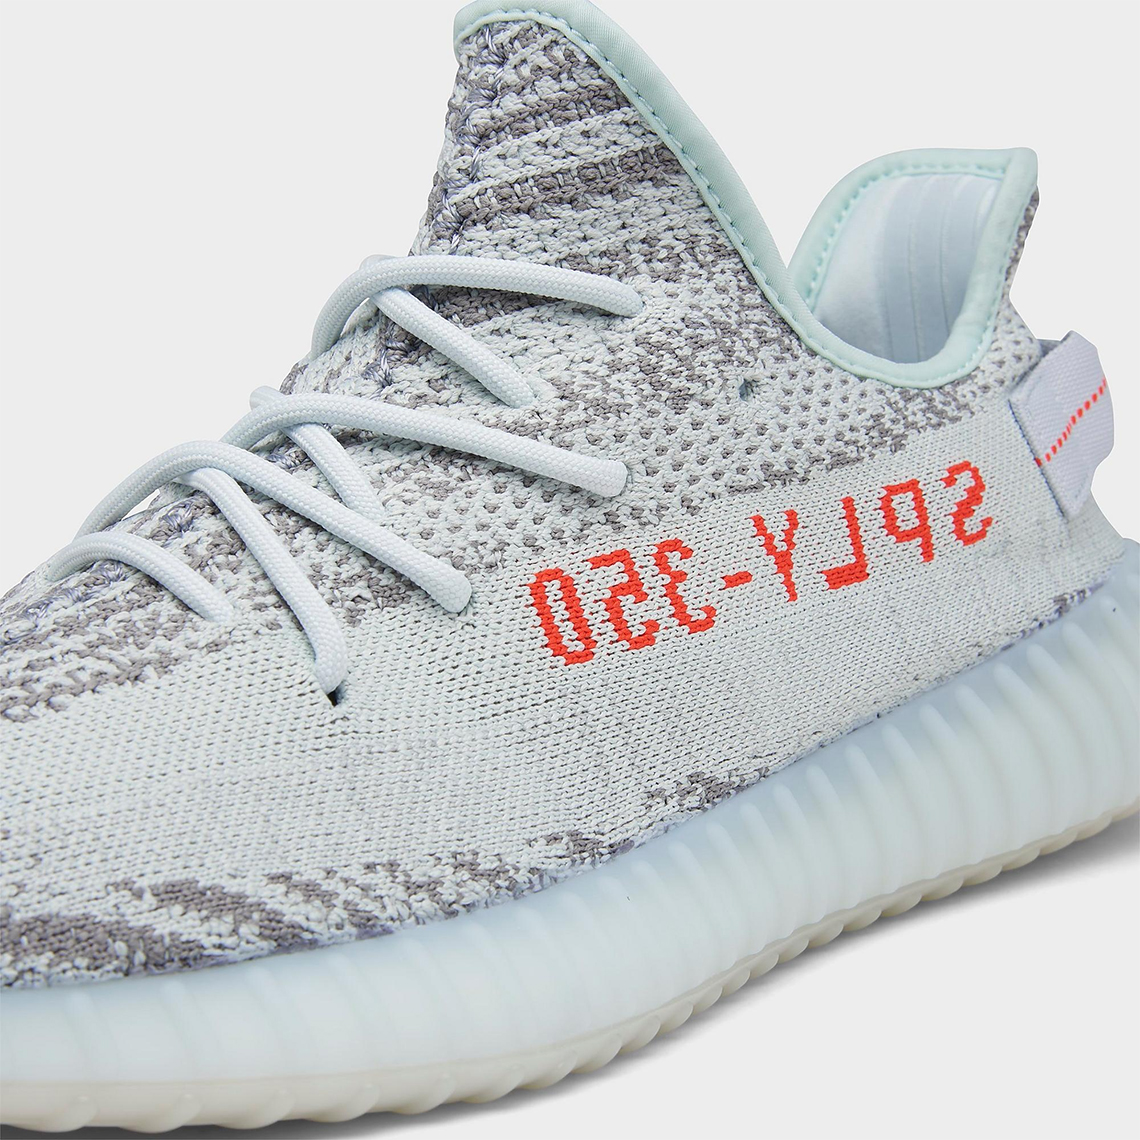 Adidas Yeezy Boost 350 V2 Blue Tint B37571 2022 Release Date 3